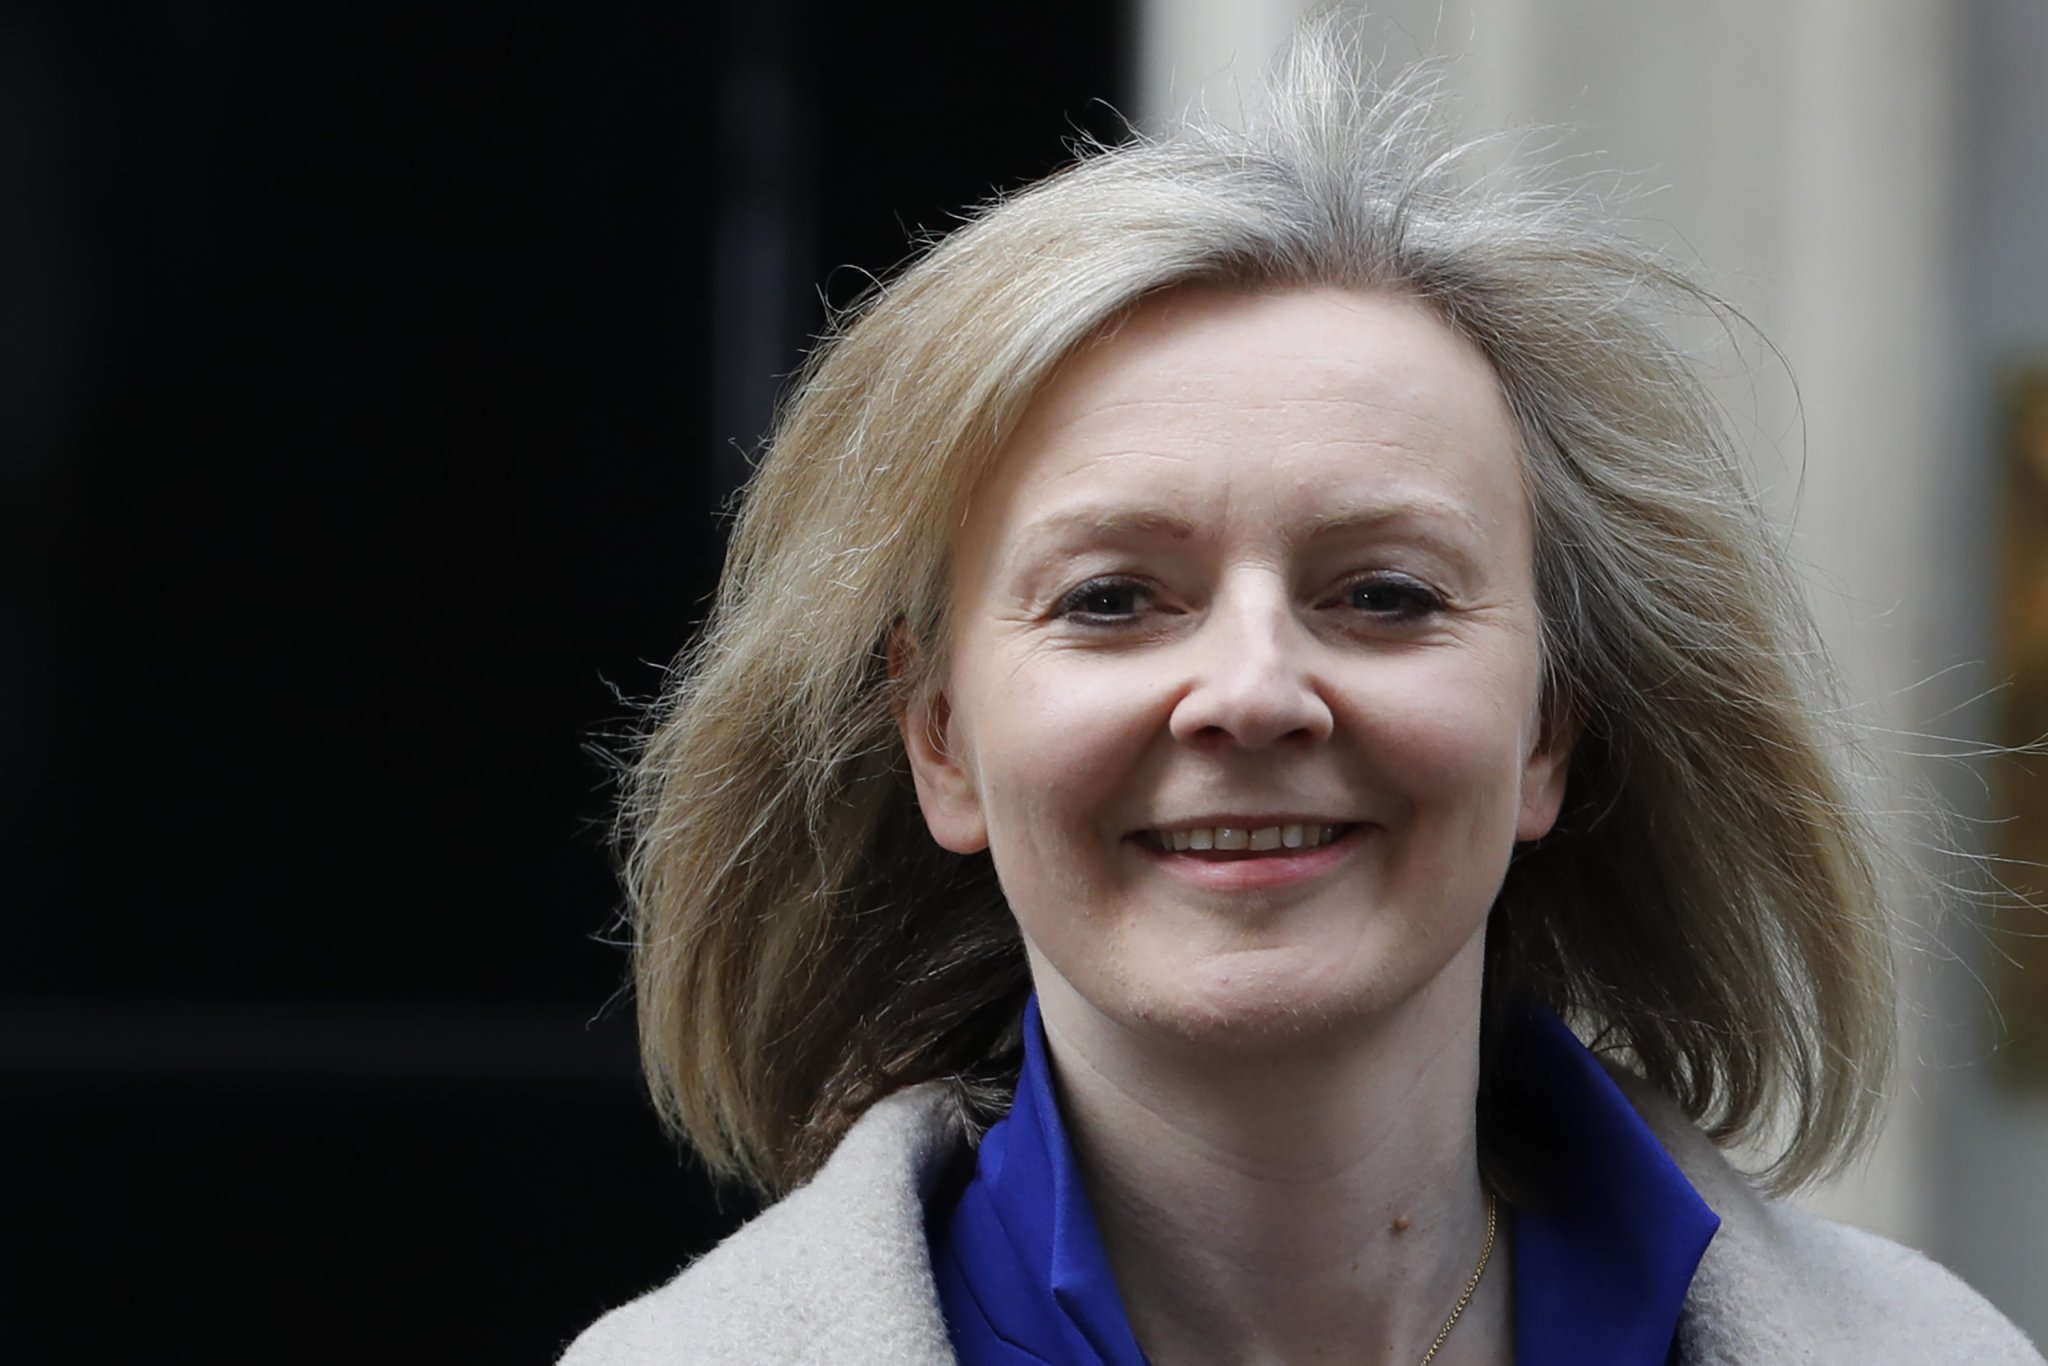 Liz Truss confirms government disbanded LGBT Advisory Panel after it backed self-ID for trans people